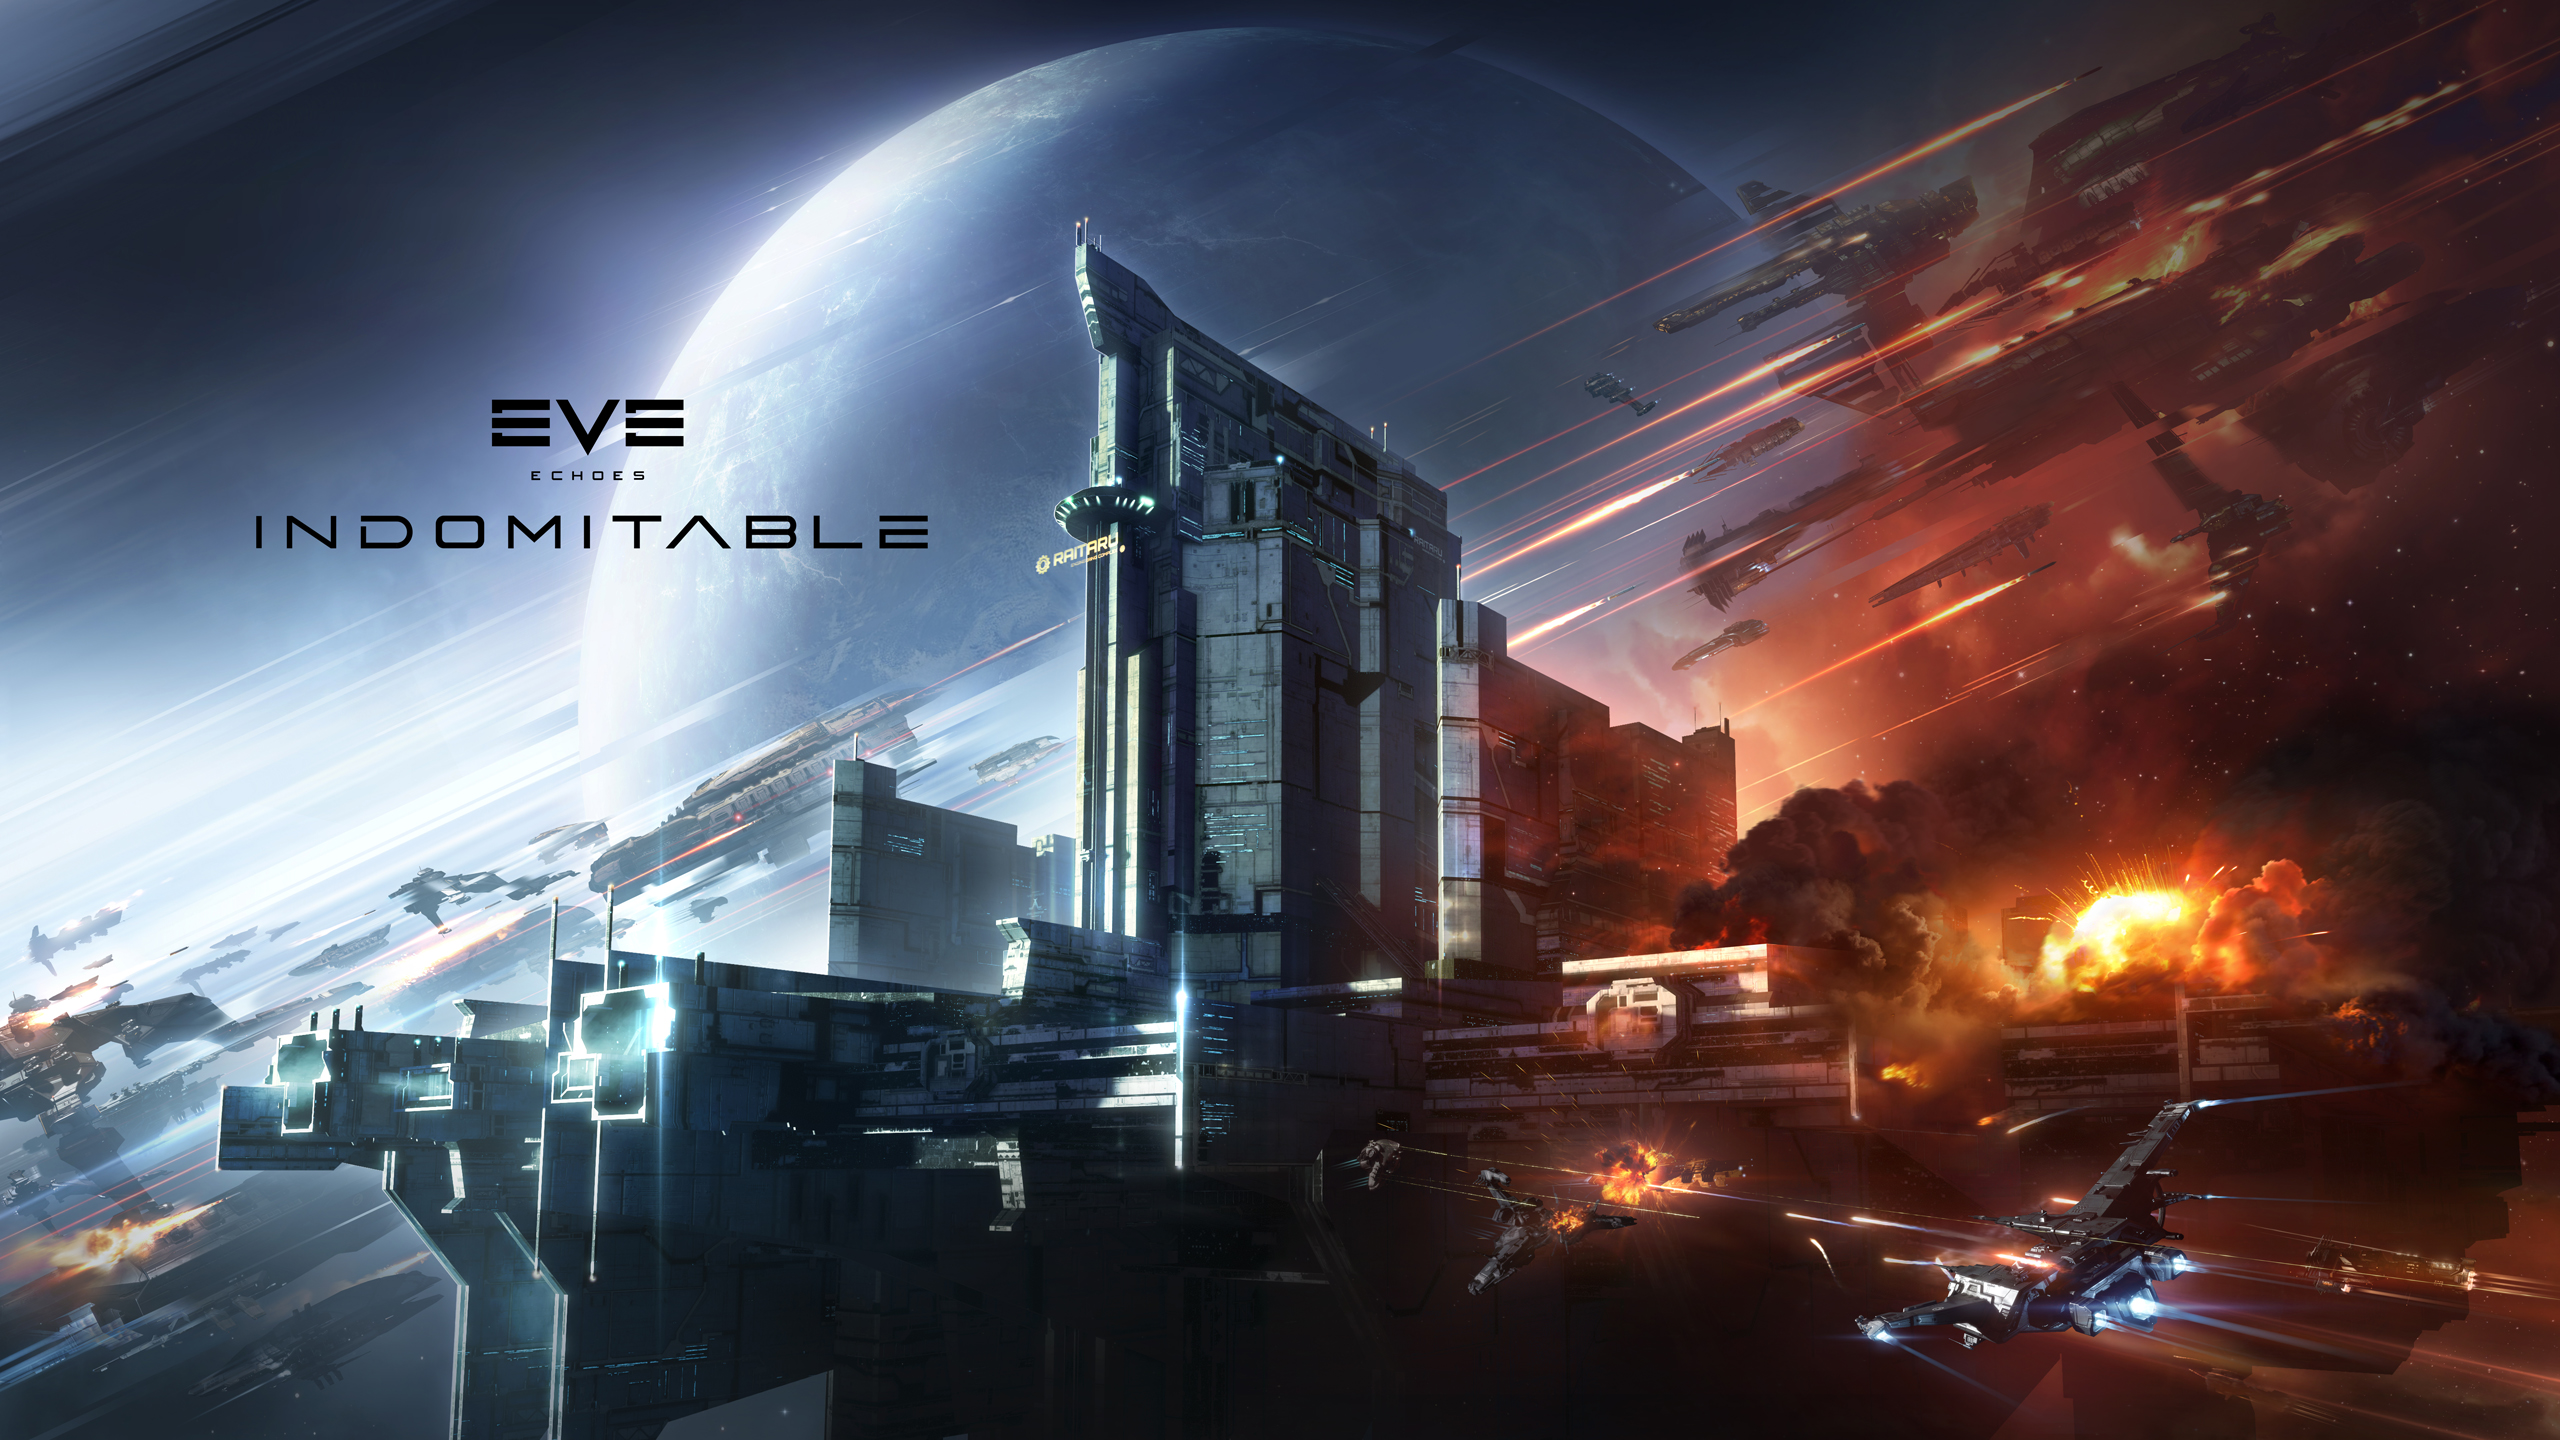 Control the Galaxy & Battle More Players Than Ever Before in The New Expansion for EVE Echoes, INDOMITABLE